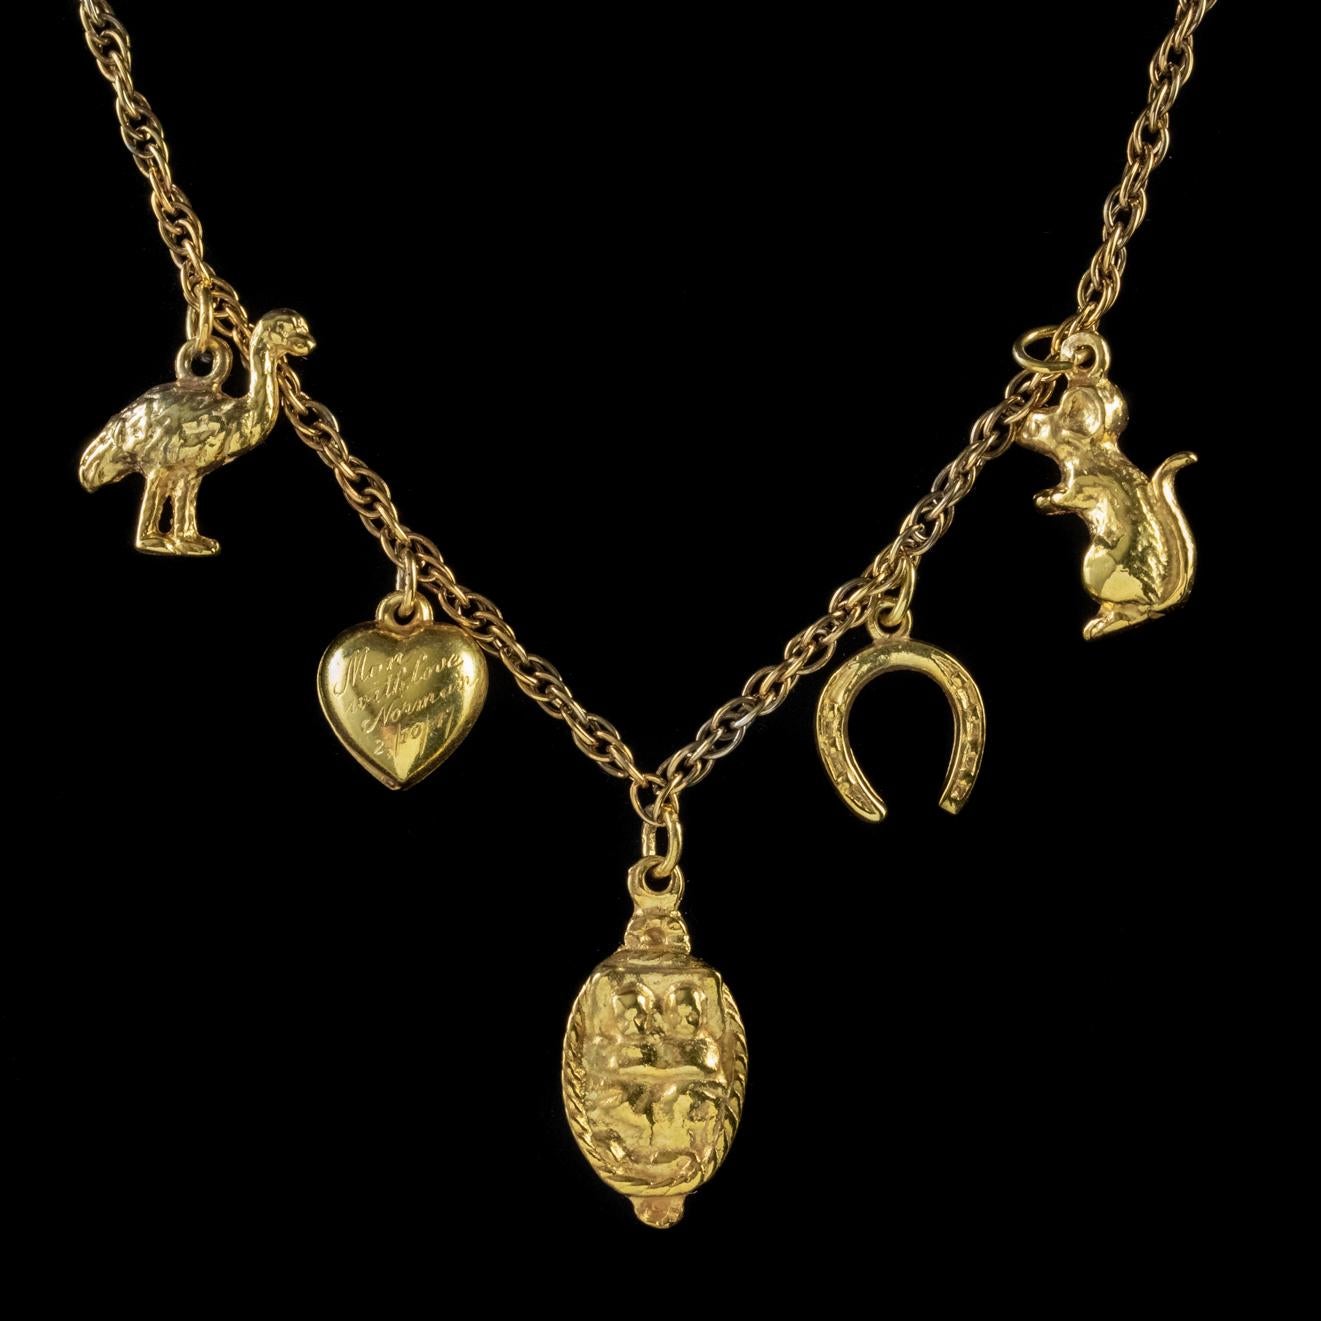 A highly unusual Vintage necklace crafted in Silver and gilded in 18ct Yellow Gold with an array of unique, three dimensional charms dotted throughout the chain. 

Each charm is solid and distinctive with expert engraved detailing. The charms